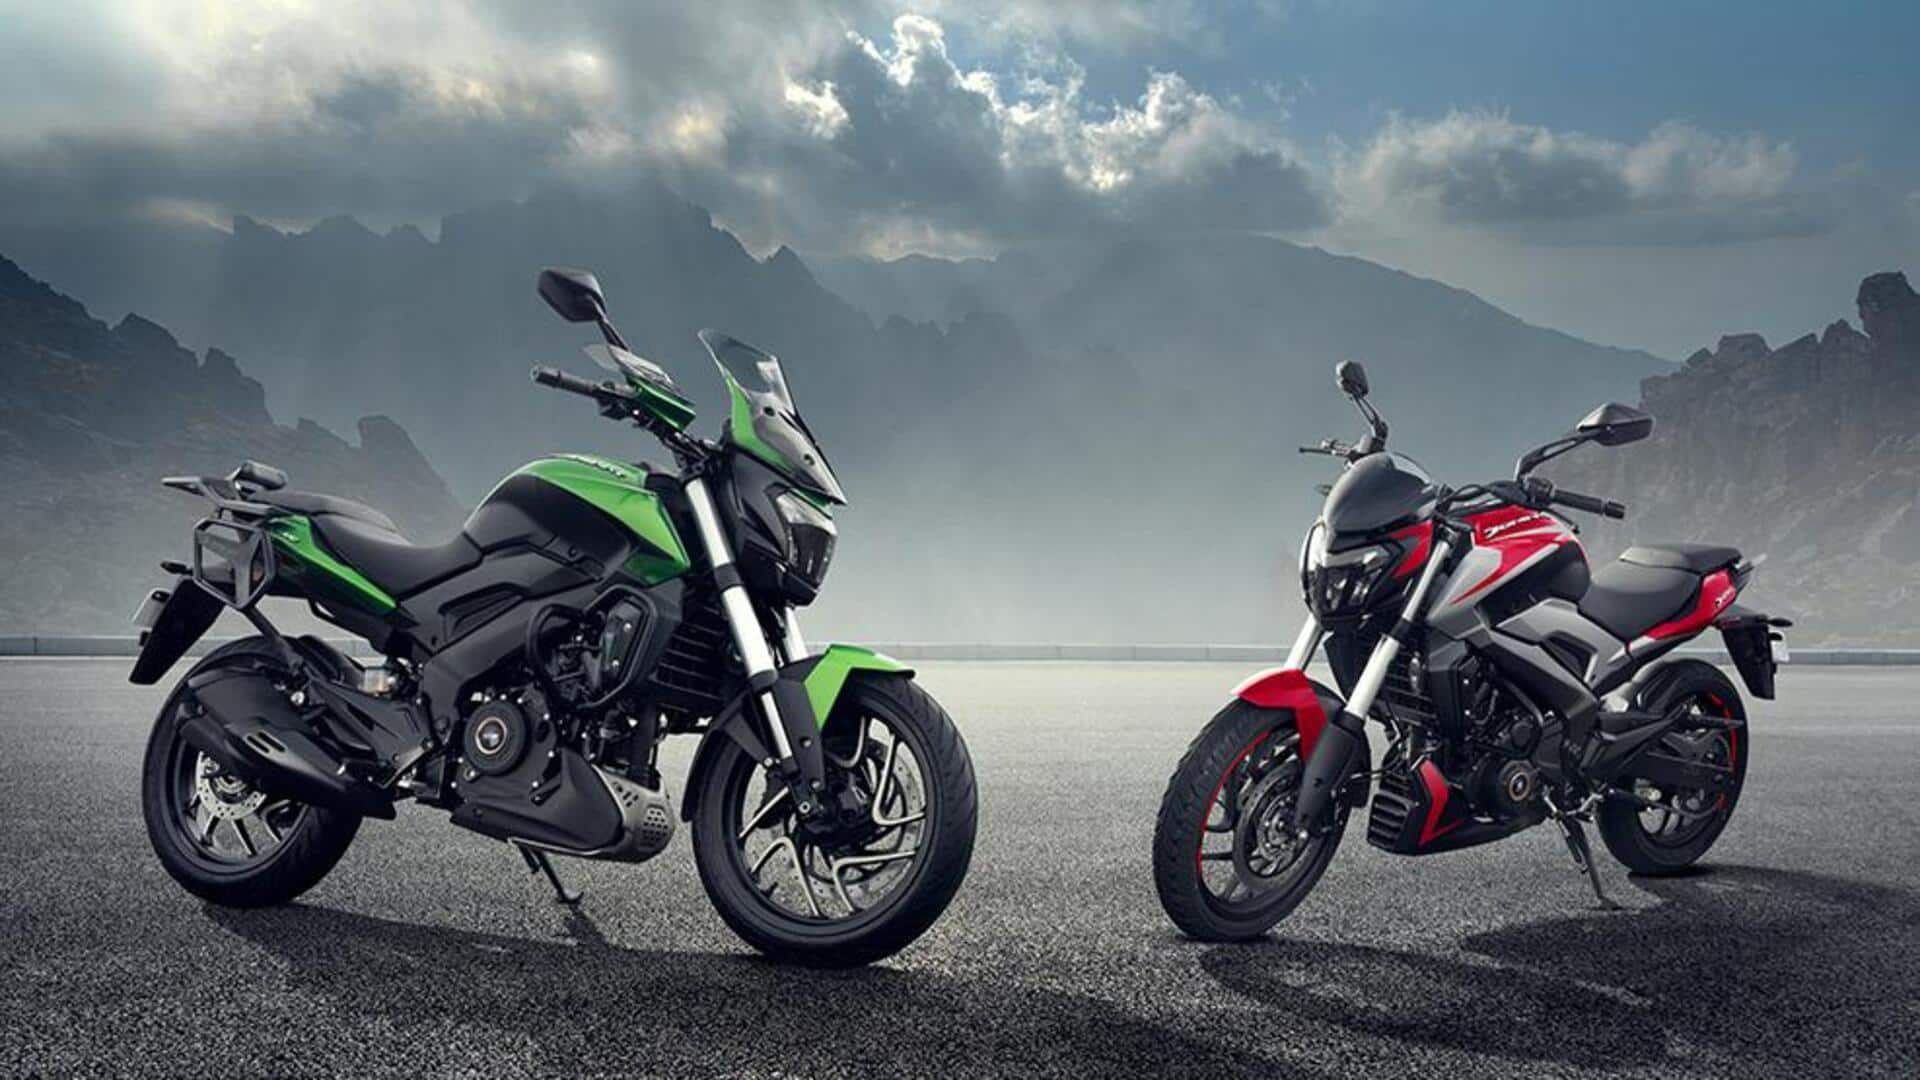 Bajaj Auto working on lighter Dominar 400 with riding aids